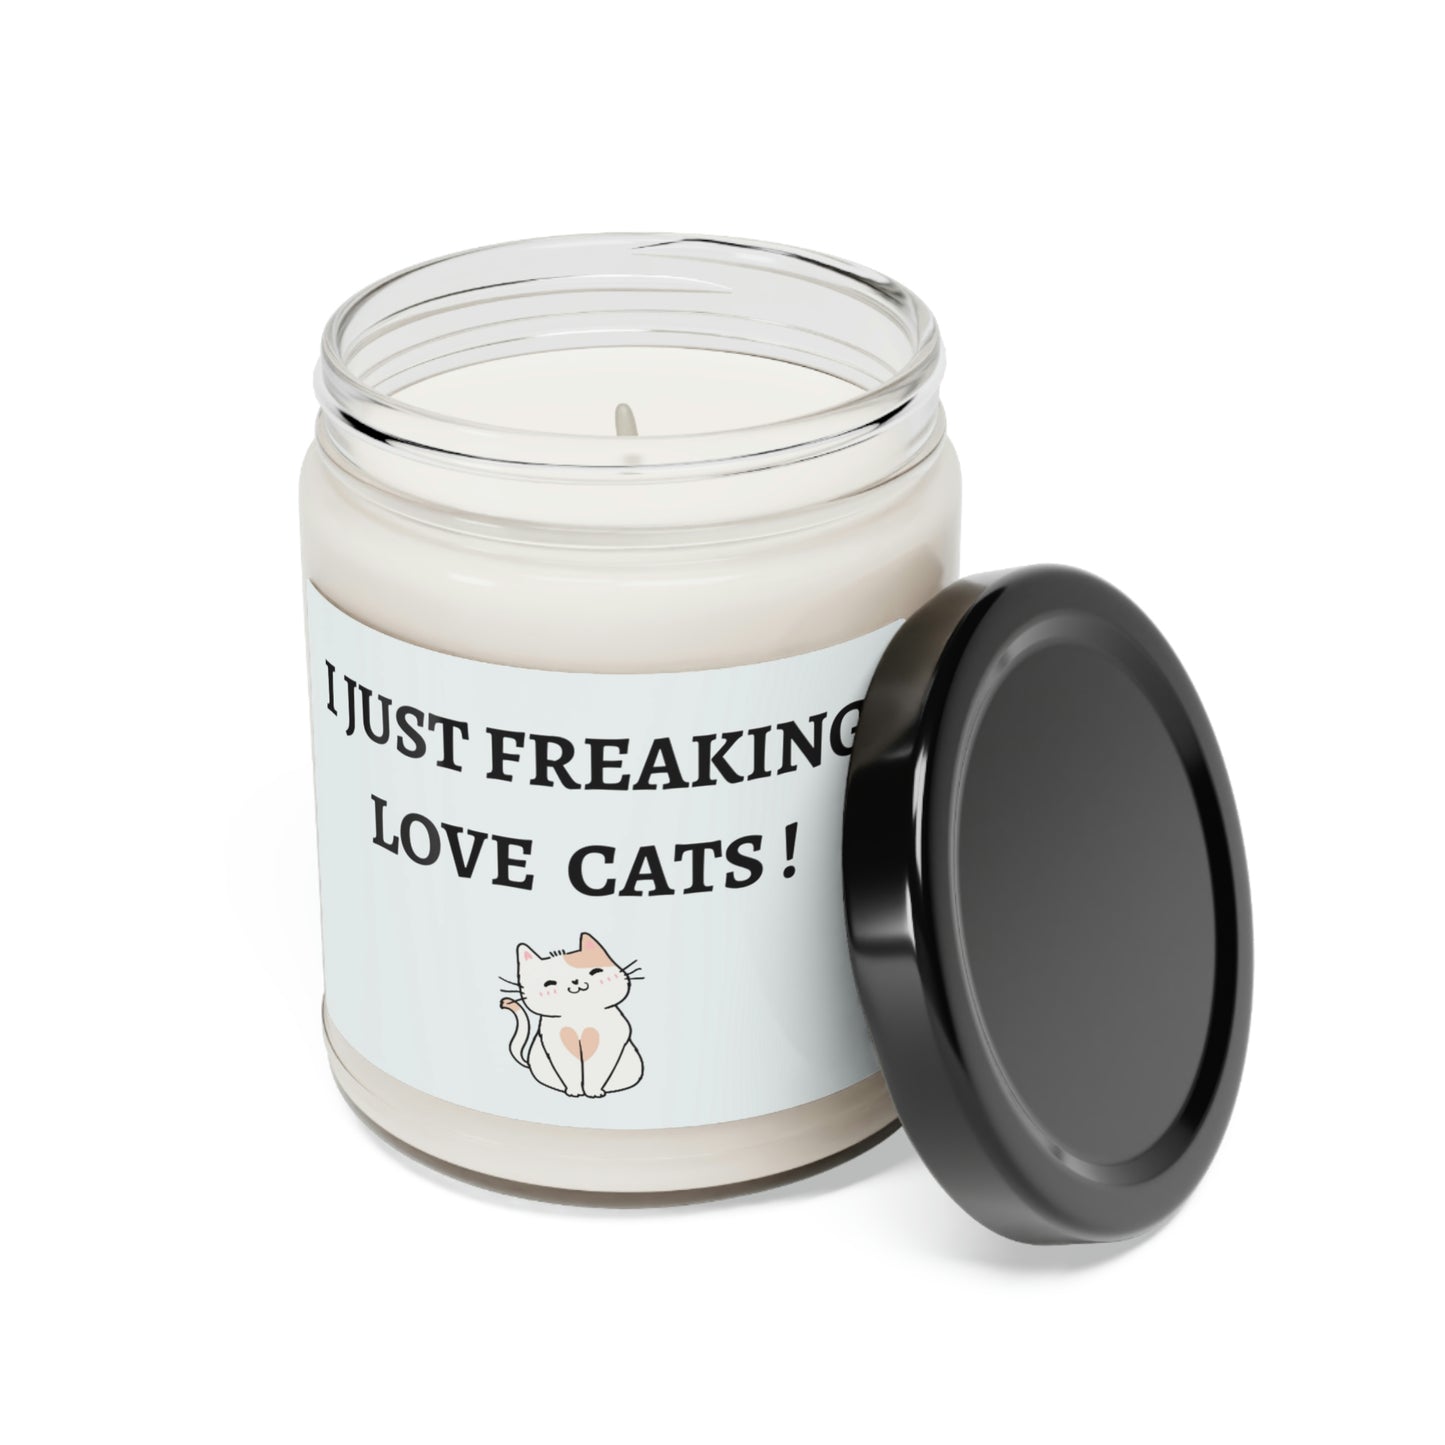 Freaking Love Cats ... Scented Soy Candle, 9oz